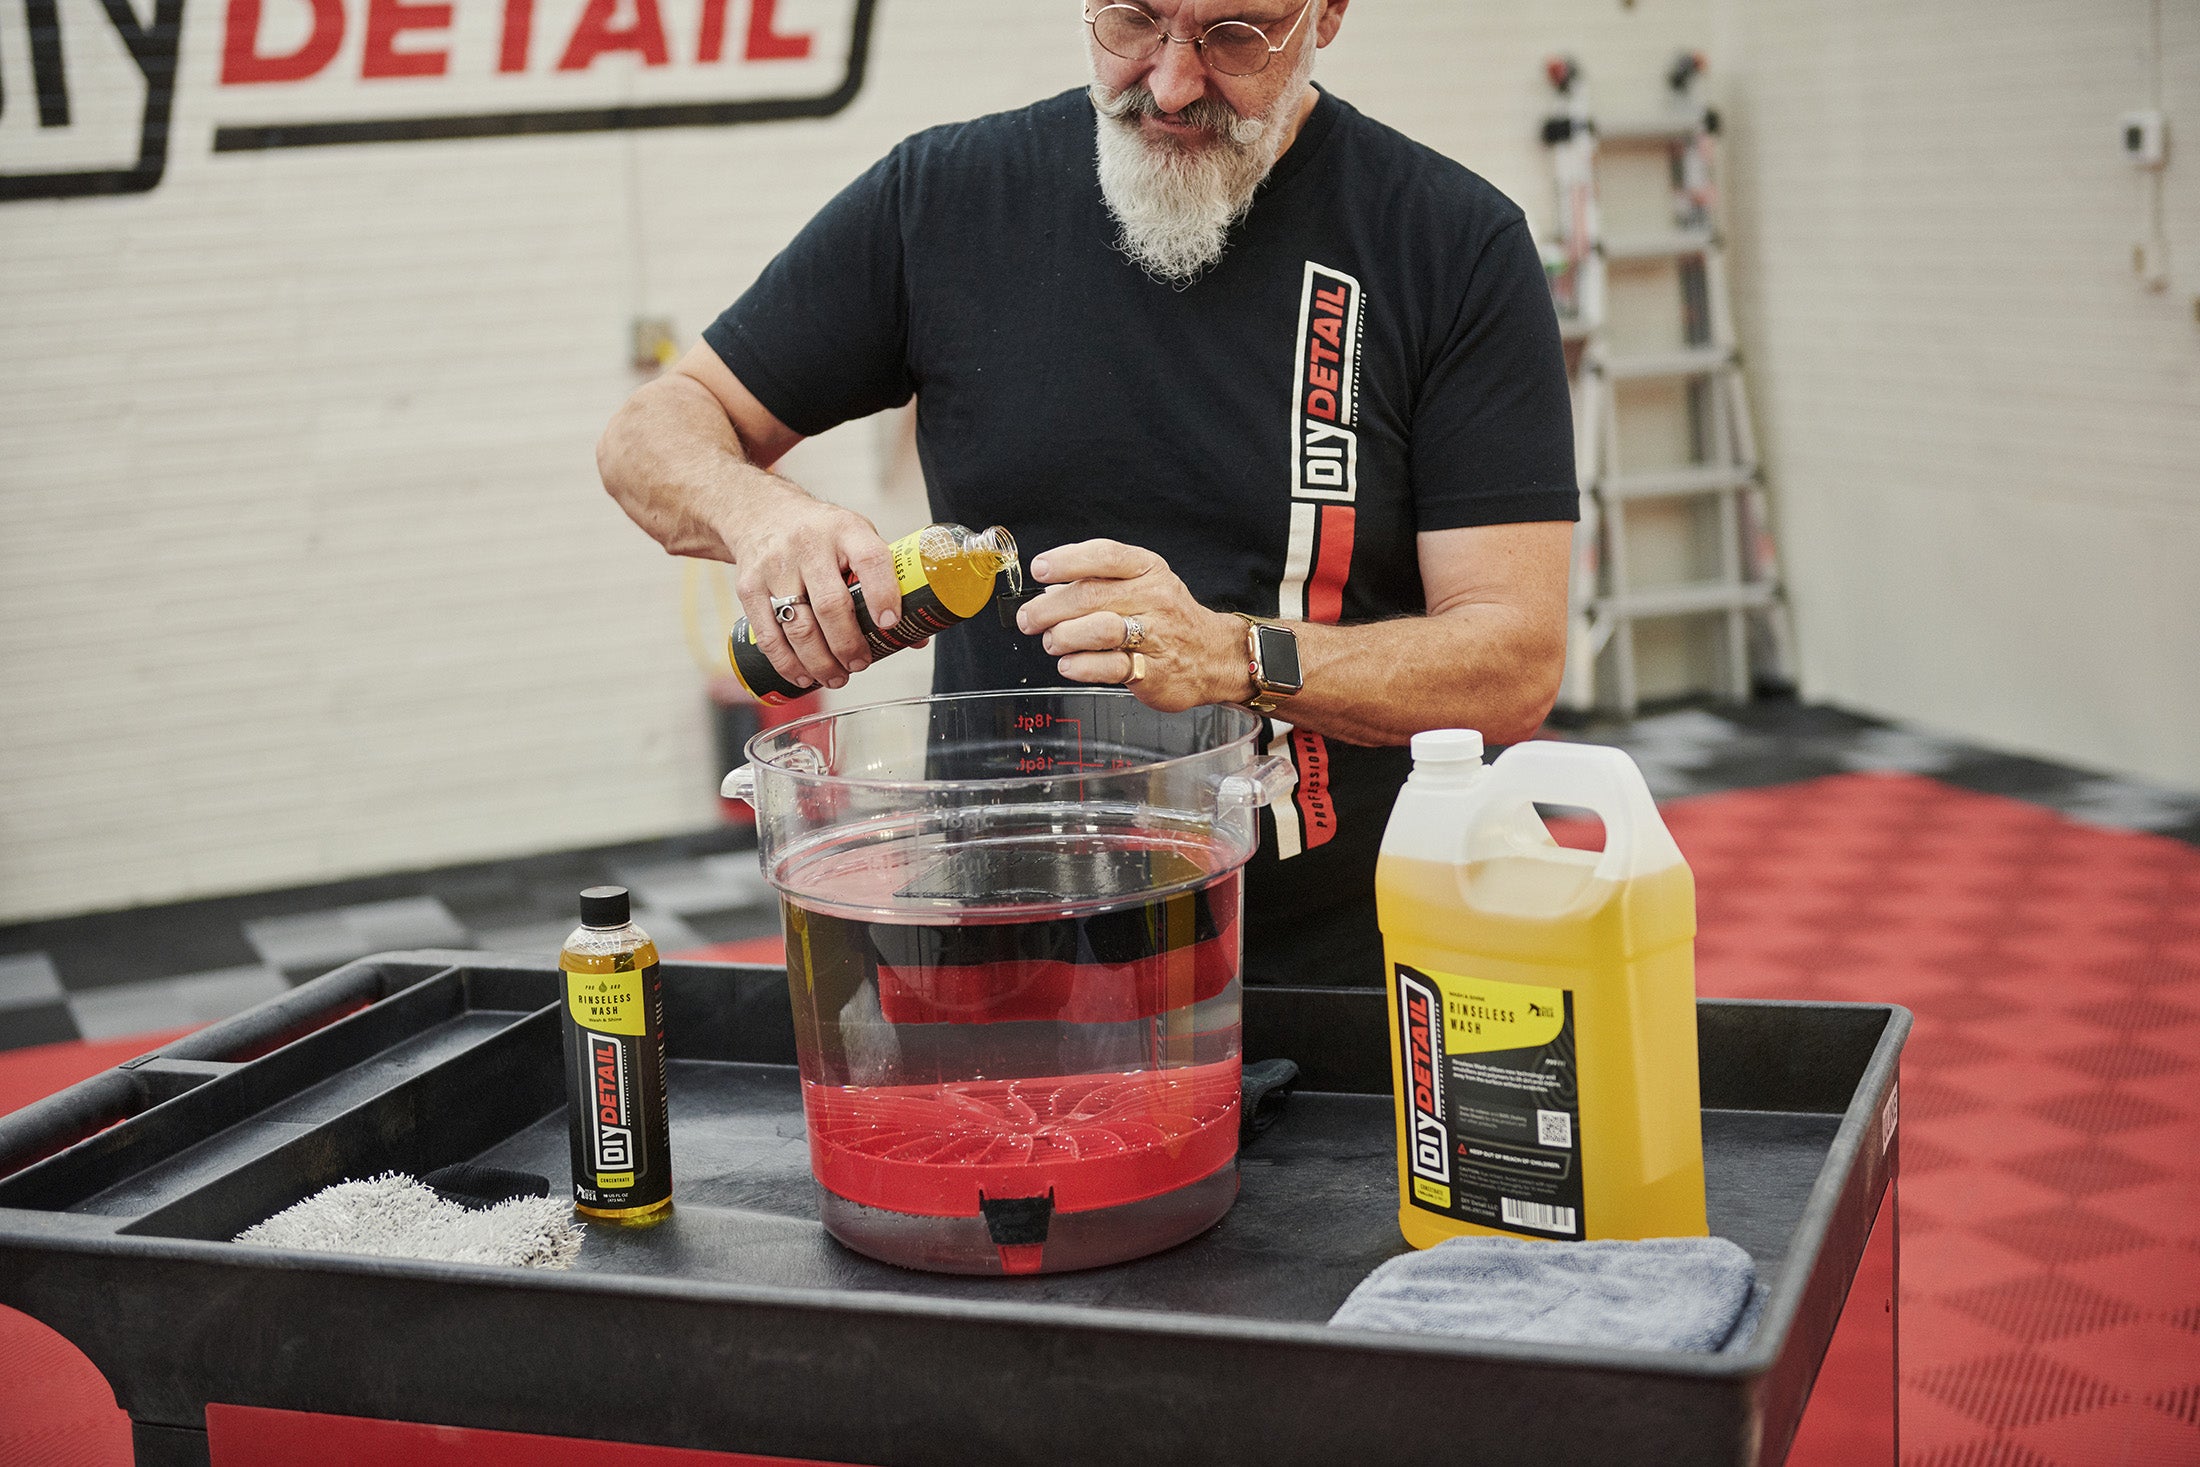 The Professional Auto Detailing Tools You Need for DIY Work